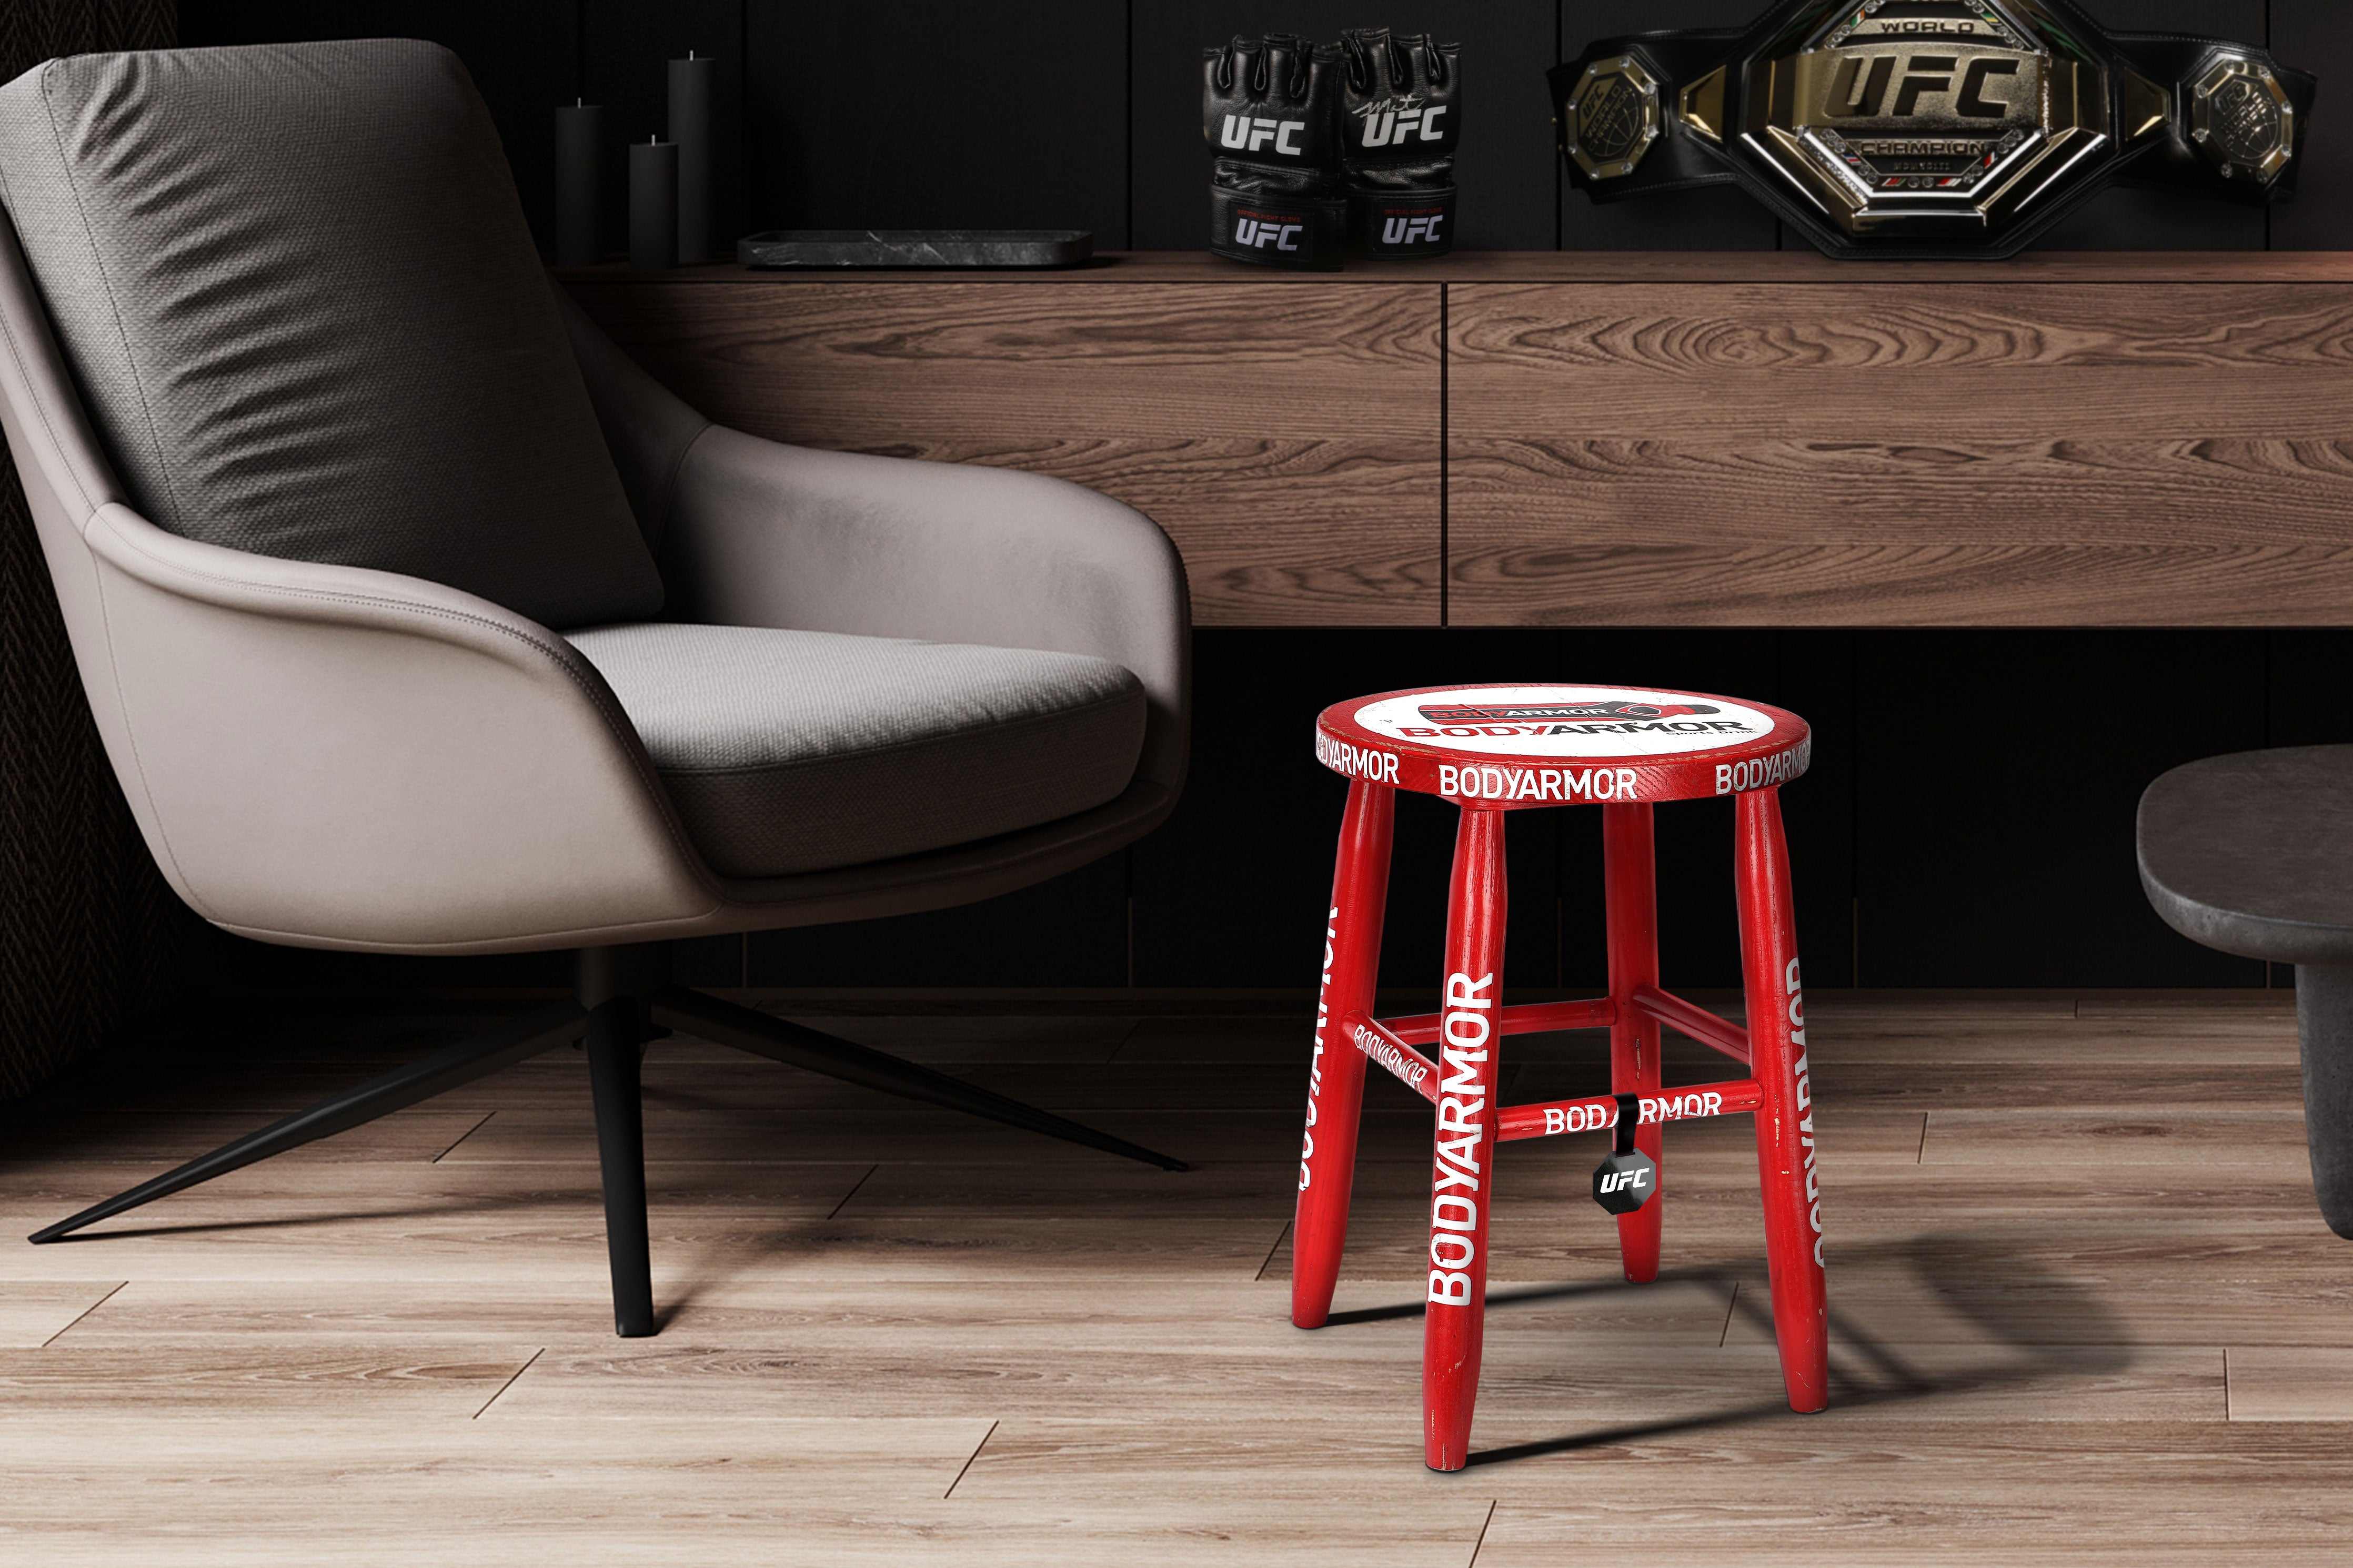 UFC Collectibles red corner stool